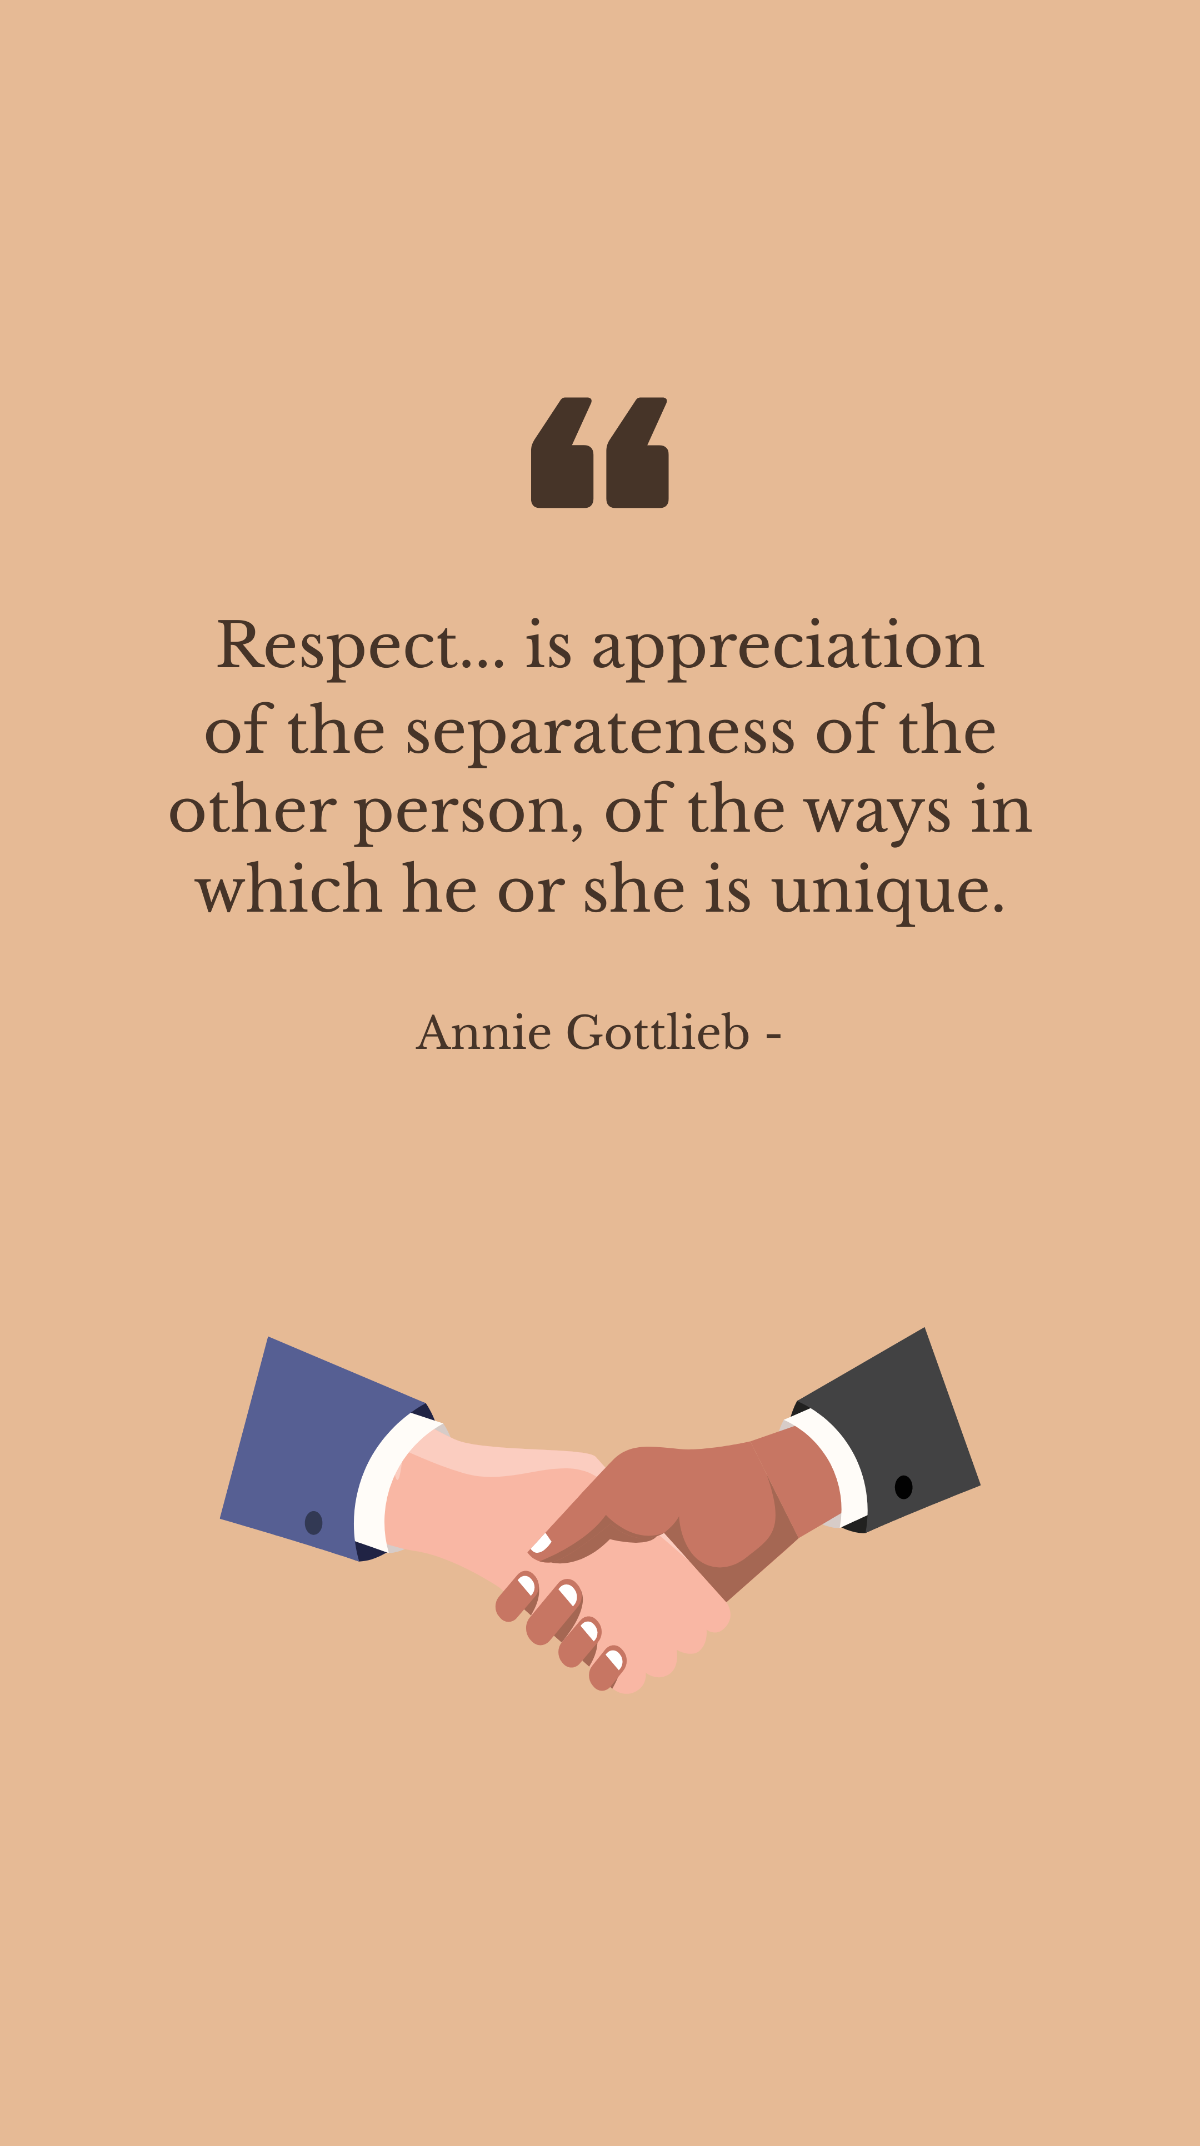 Annie Gottlieb - Respect... is appreciation of the separateness of the other person, of the ways in which he or she is unique.